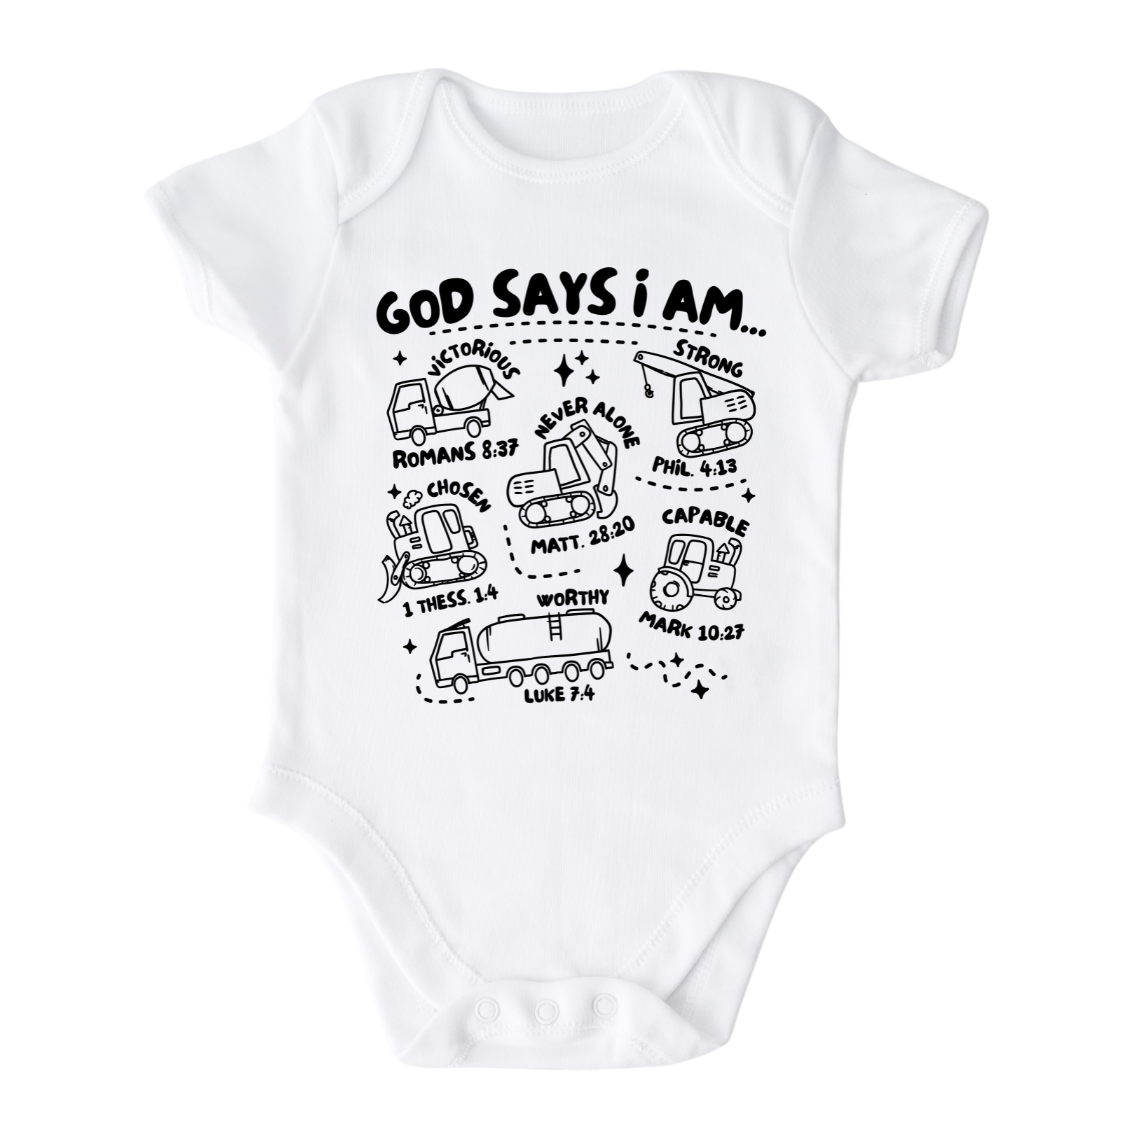 funny baby onesies baby announcement onesie personalized baby girl gifts custom baby onesie infant clothes cute baby girl clothes funny baby clothes newborn onesies unisex newborn boy onesies funny onesies for babies baby essentials baby boy clothes